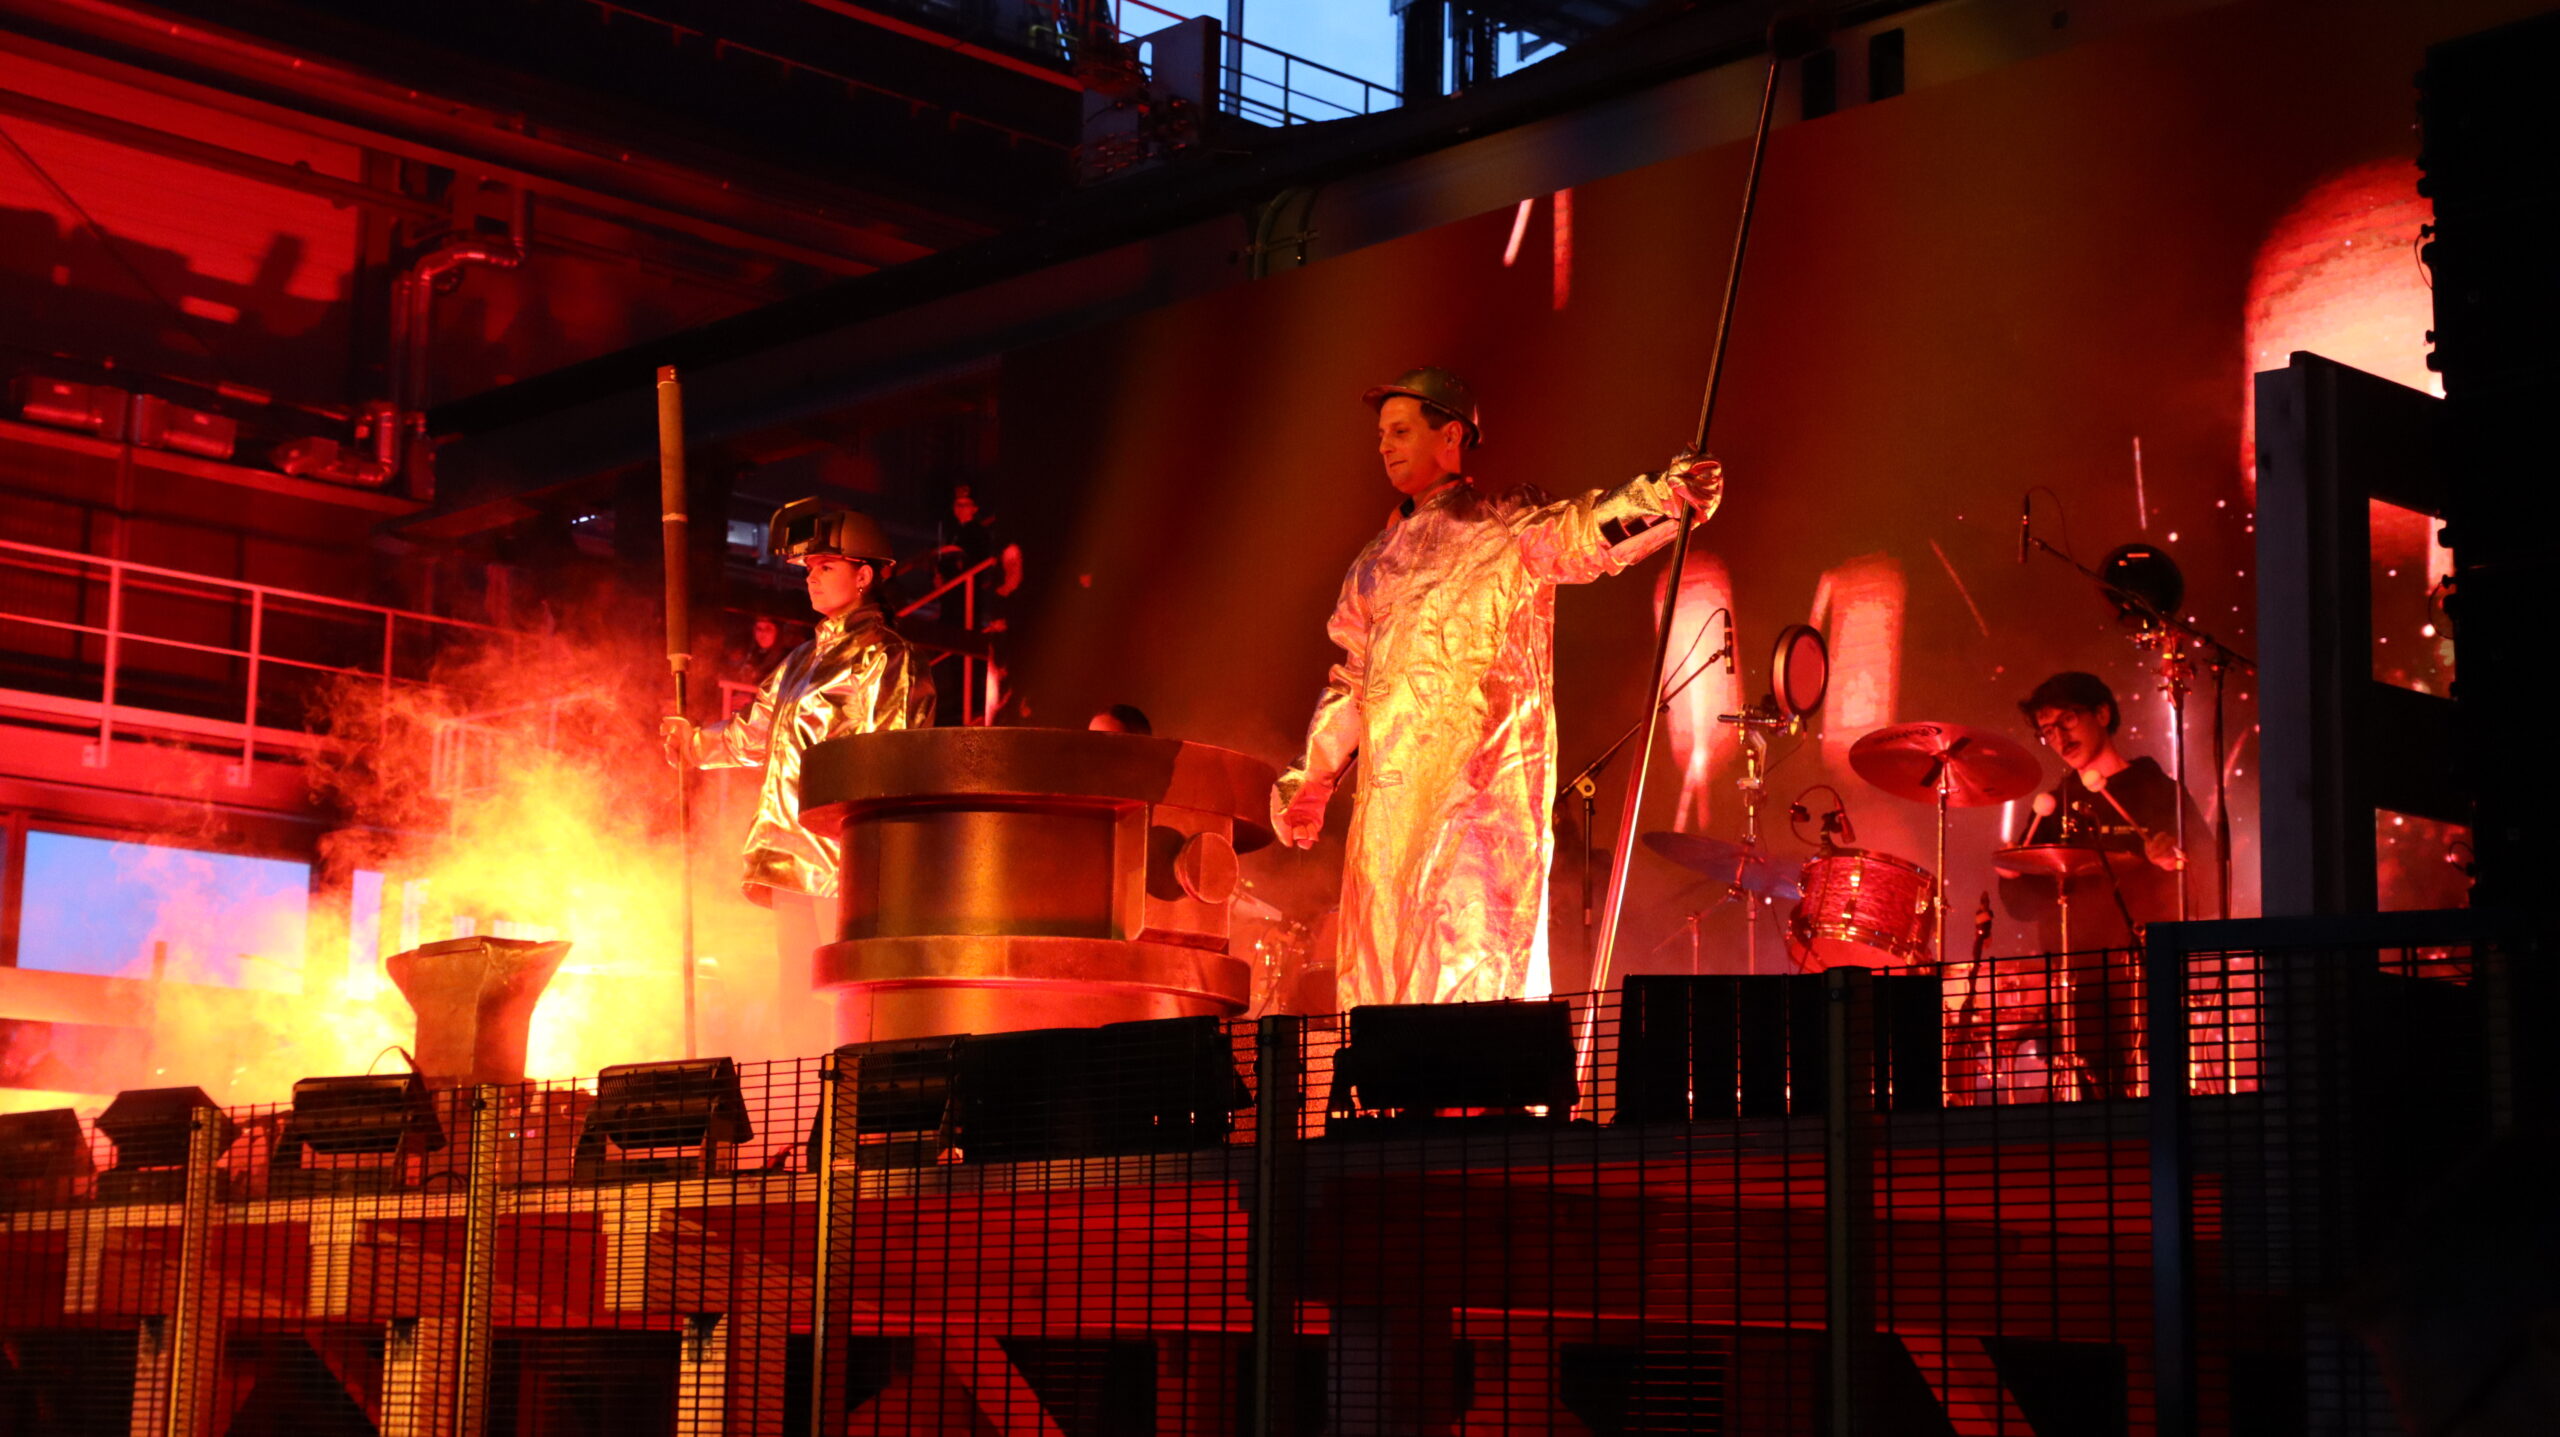 Ars Electronica Solutions designs Opening Show in world’s most advanced special steel plant